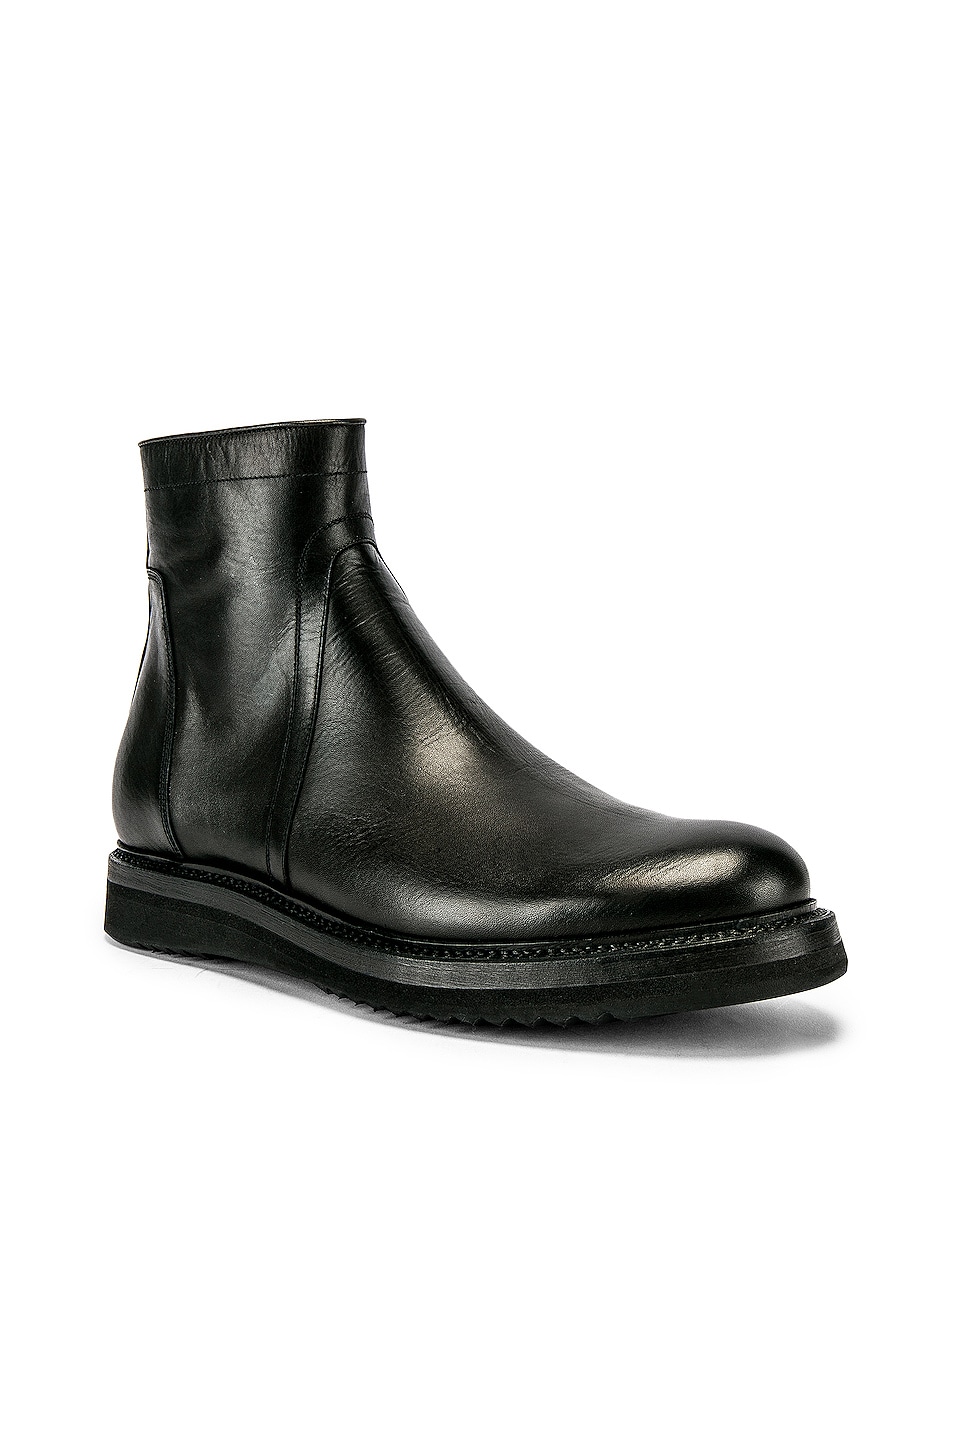 Image 1 of Rick Owens Creeper Boots in Black